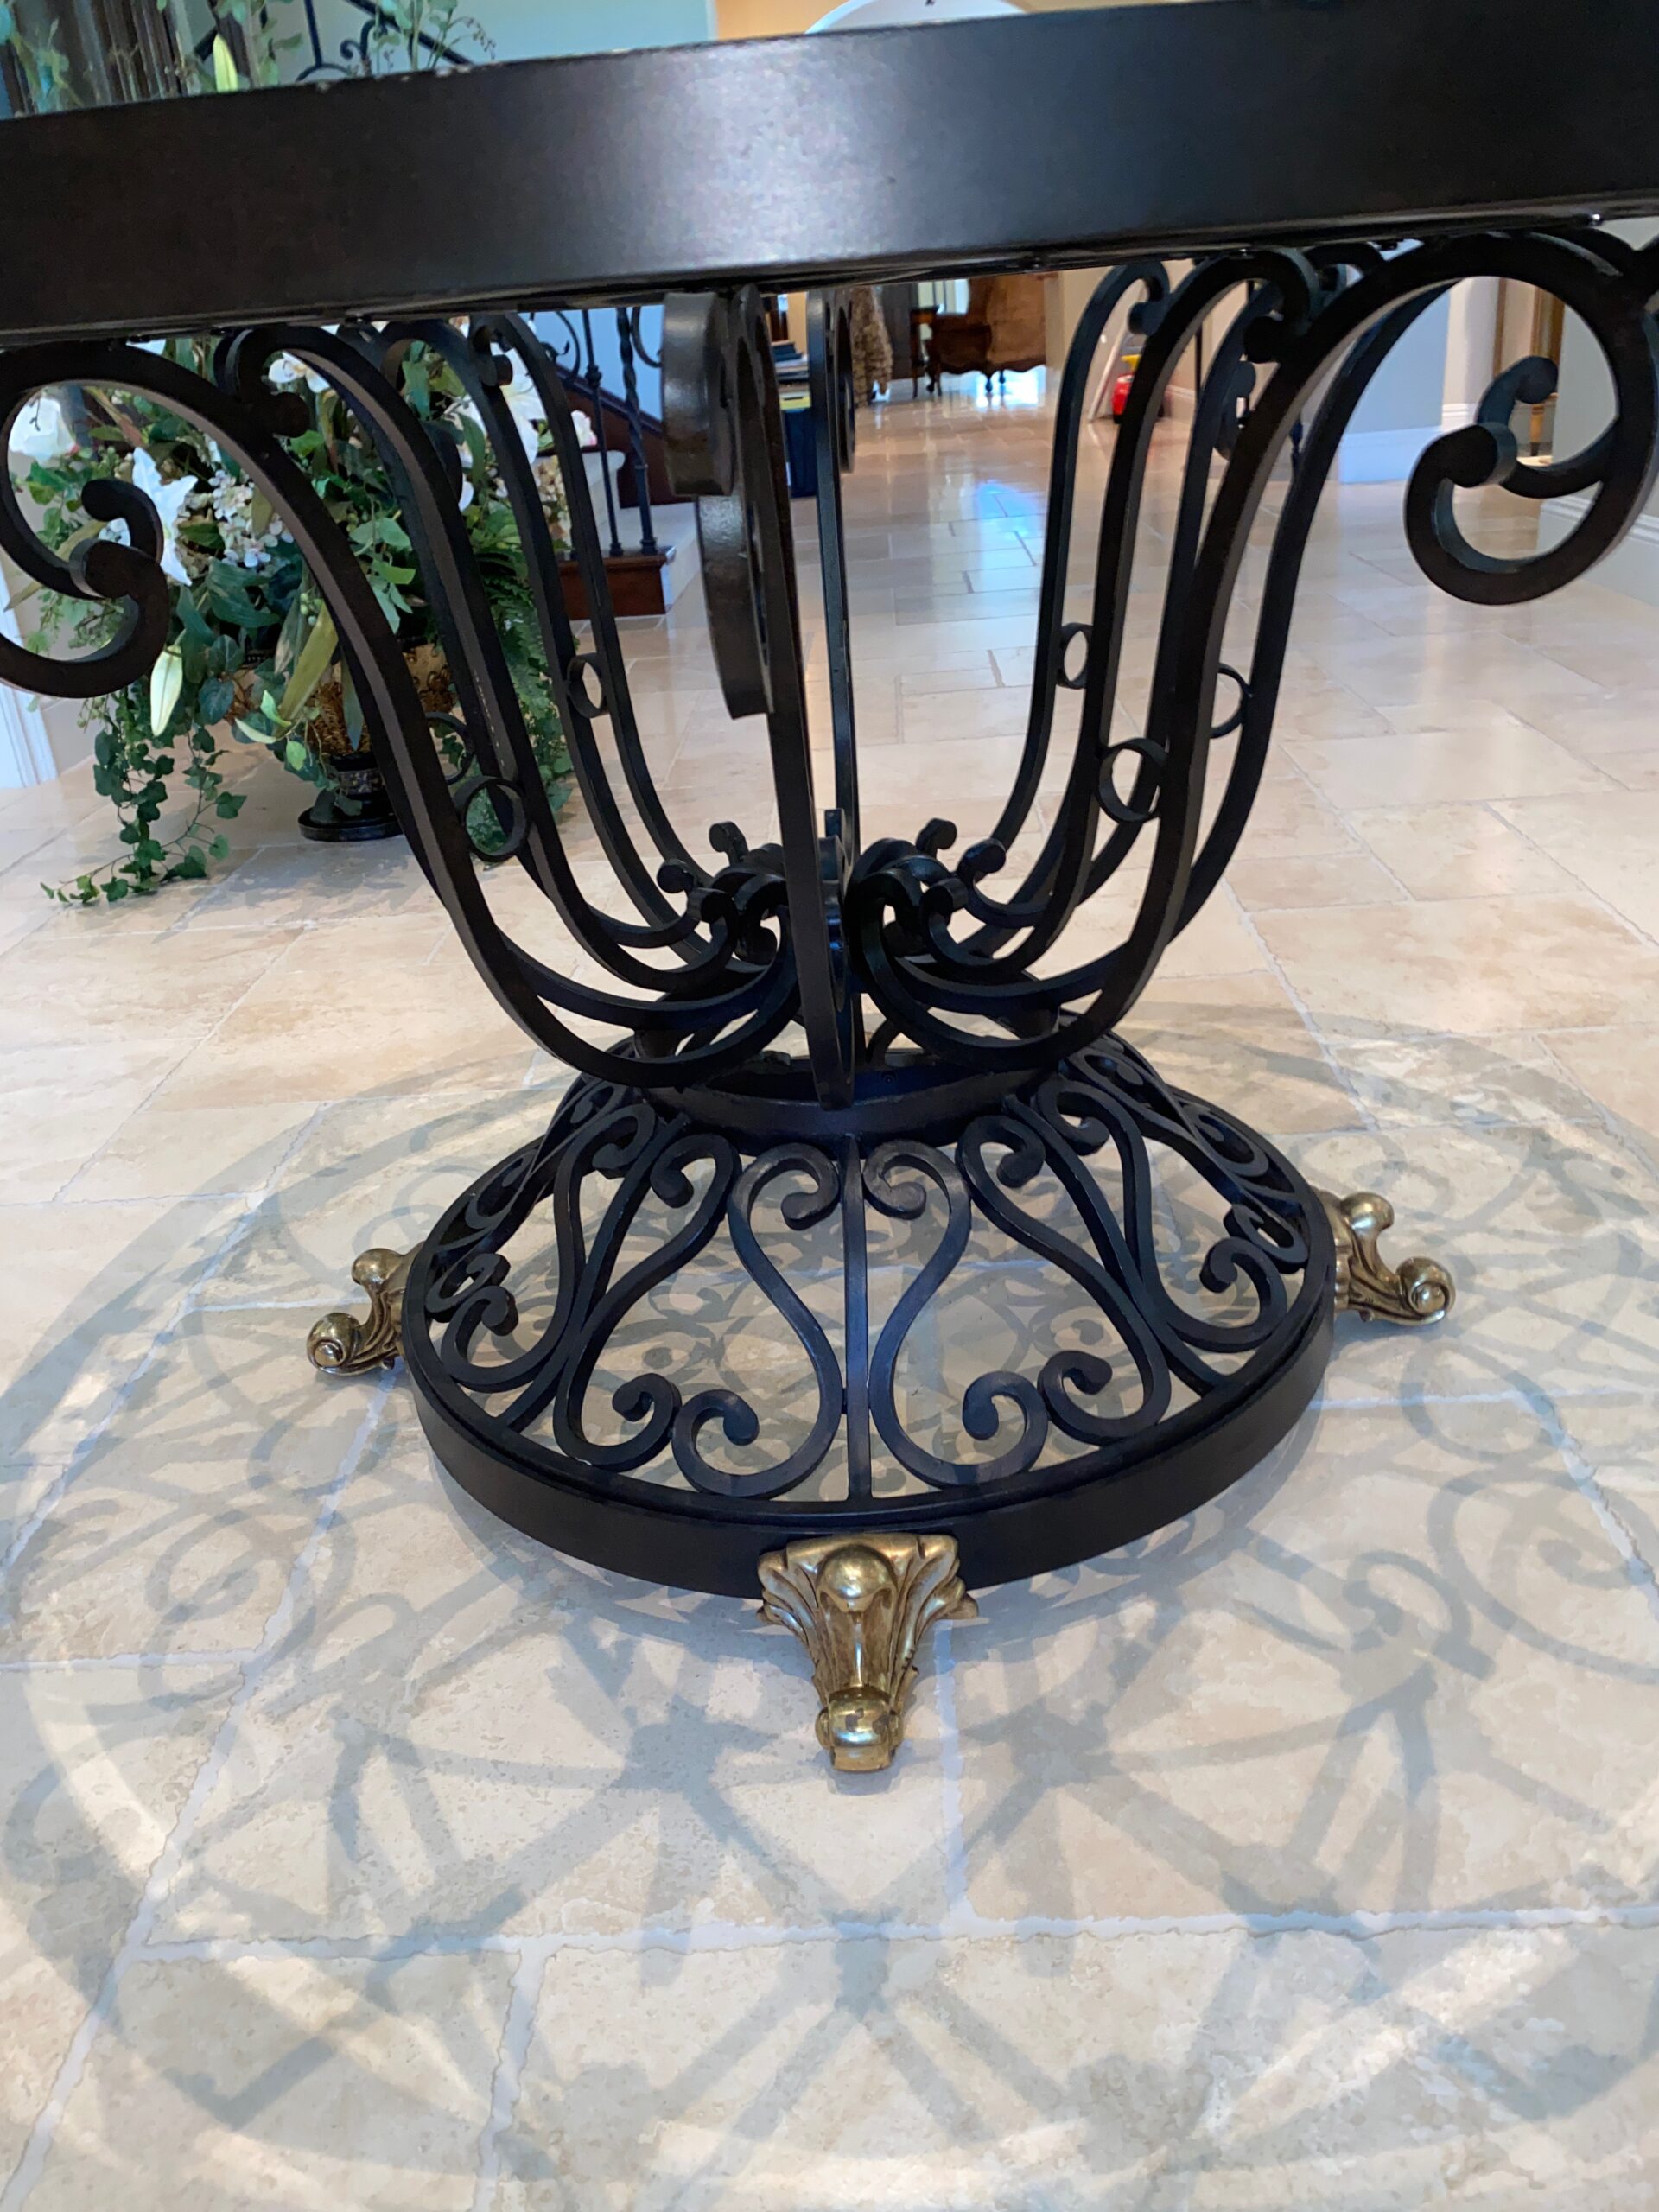 Ornate Foyer table / entry table with round glass top and curly iron